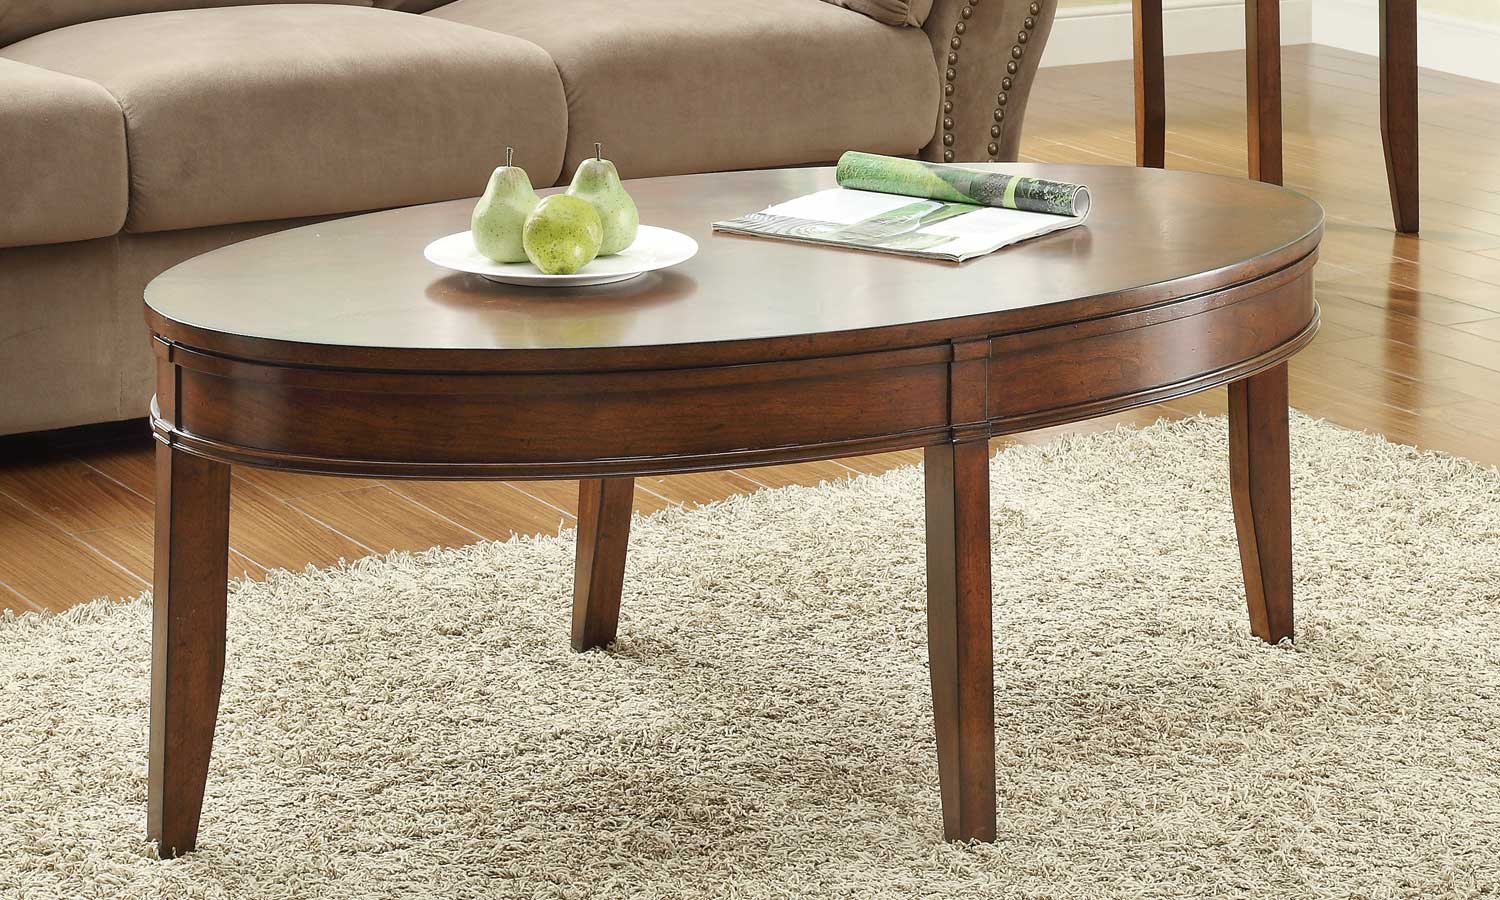 Homelegance Parrish Oval Cocktail Table - Cherry